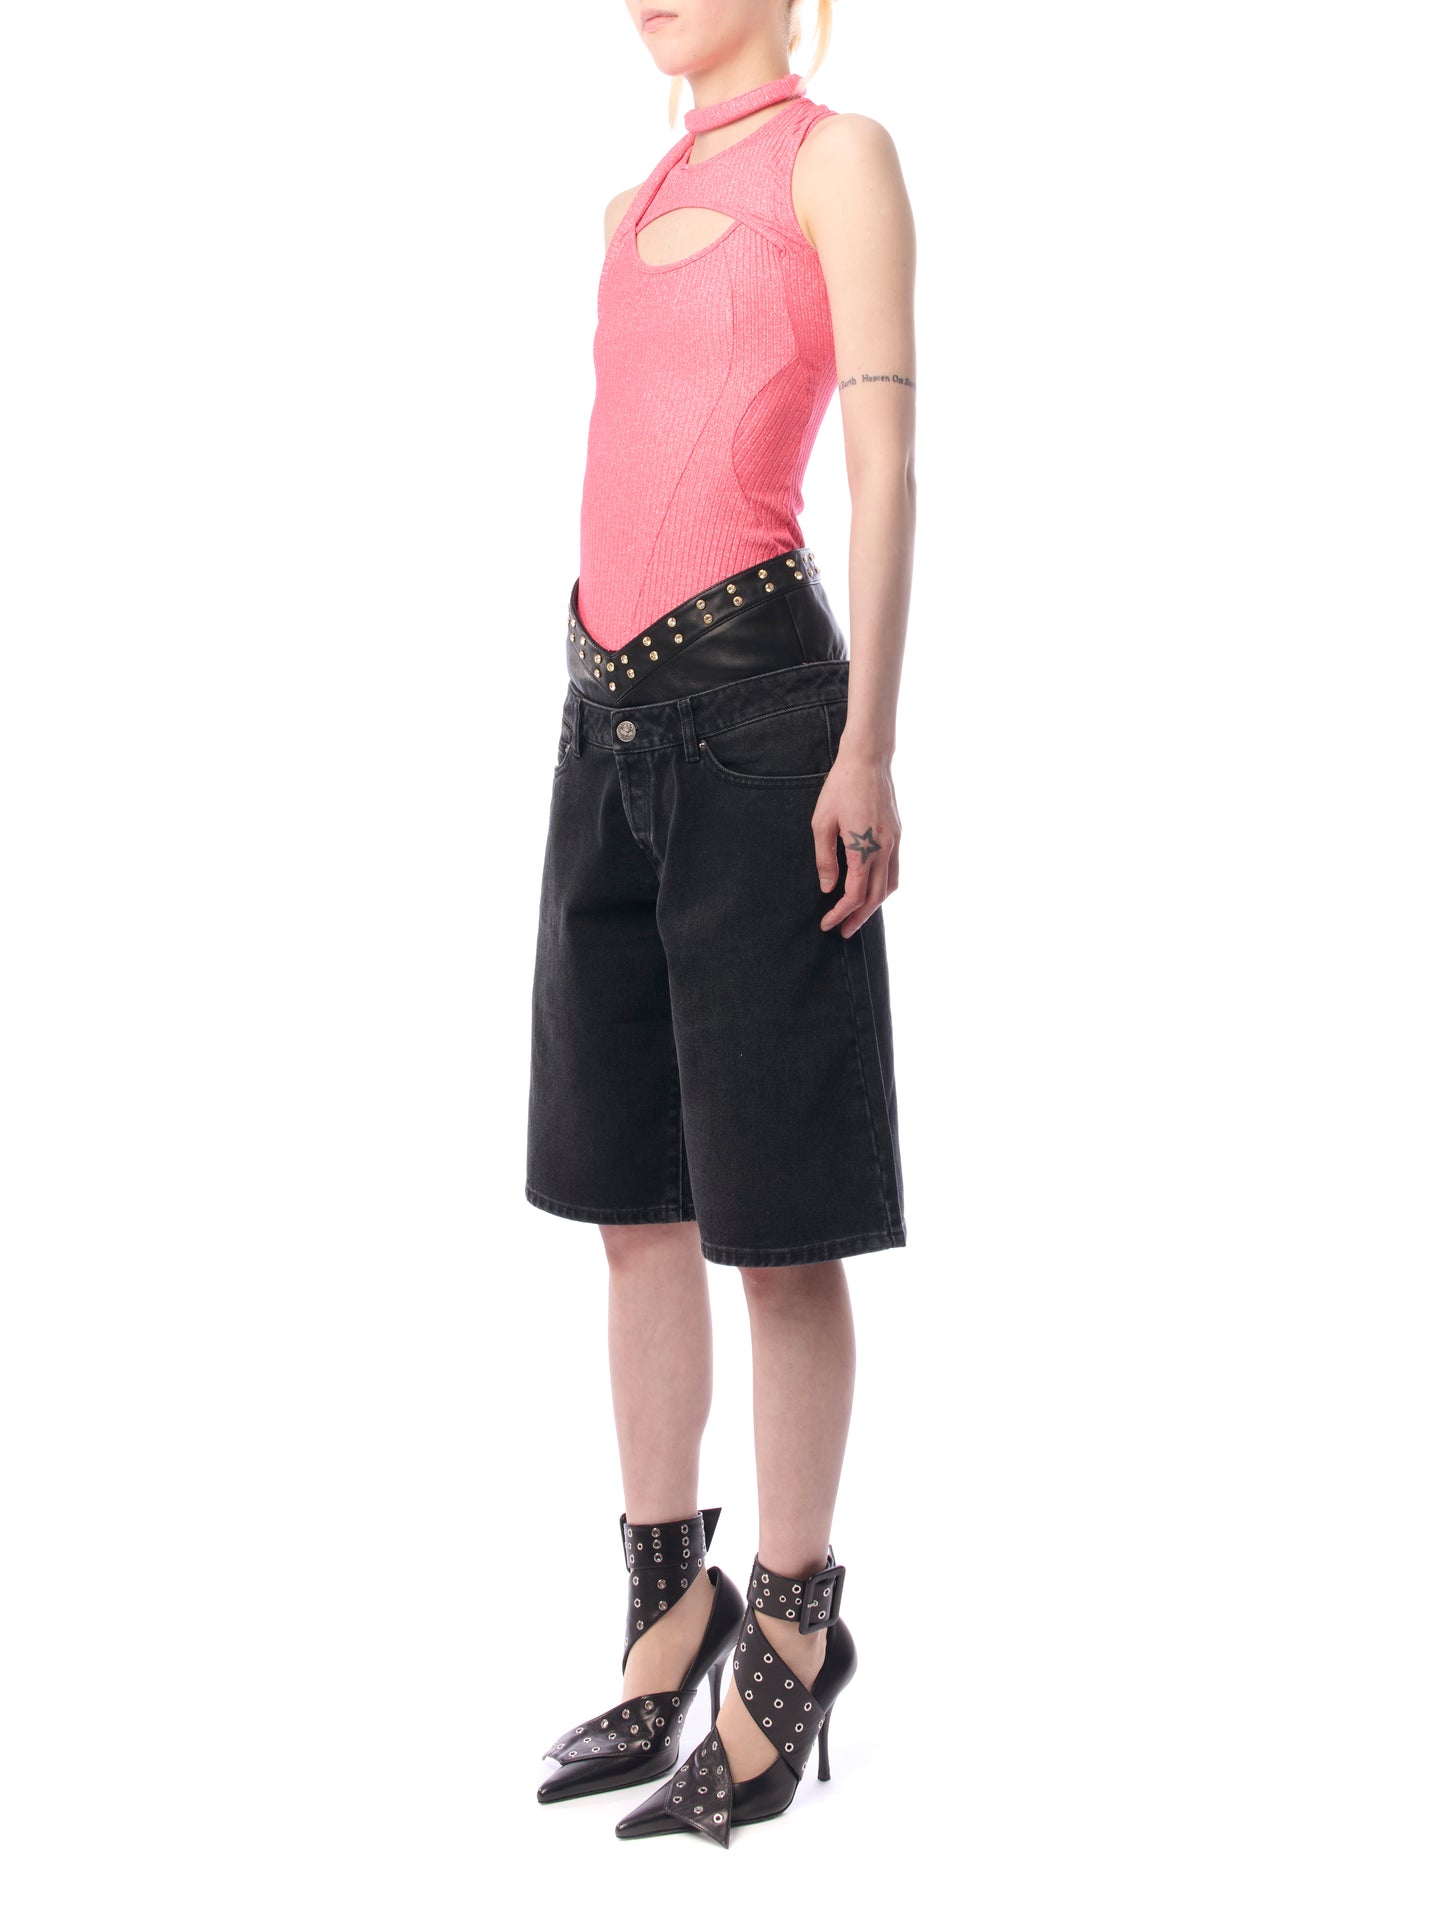 Ottolinger Layered Cut-Out Pink Tank Top